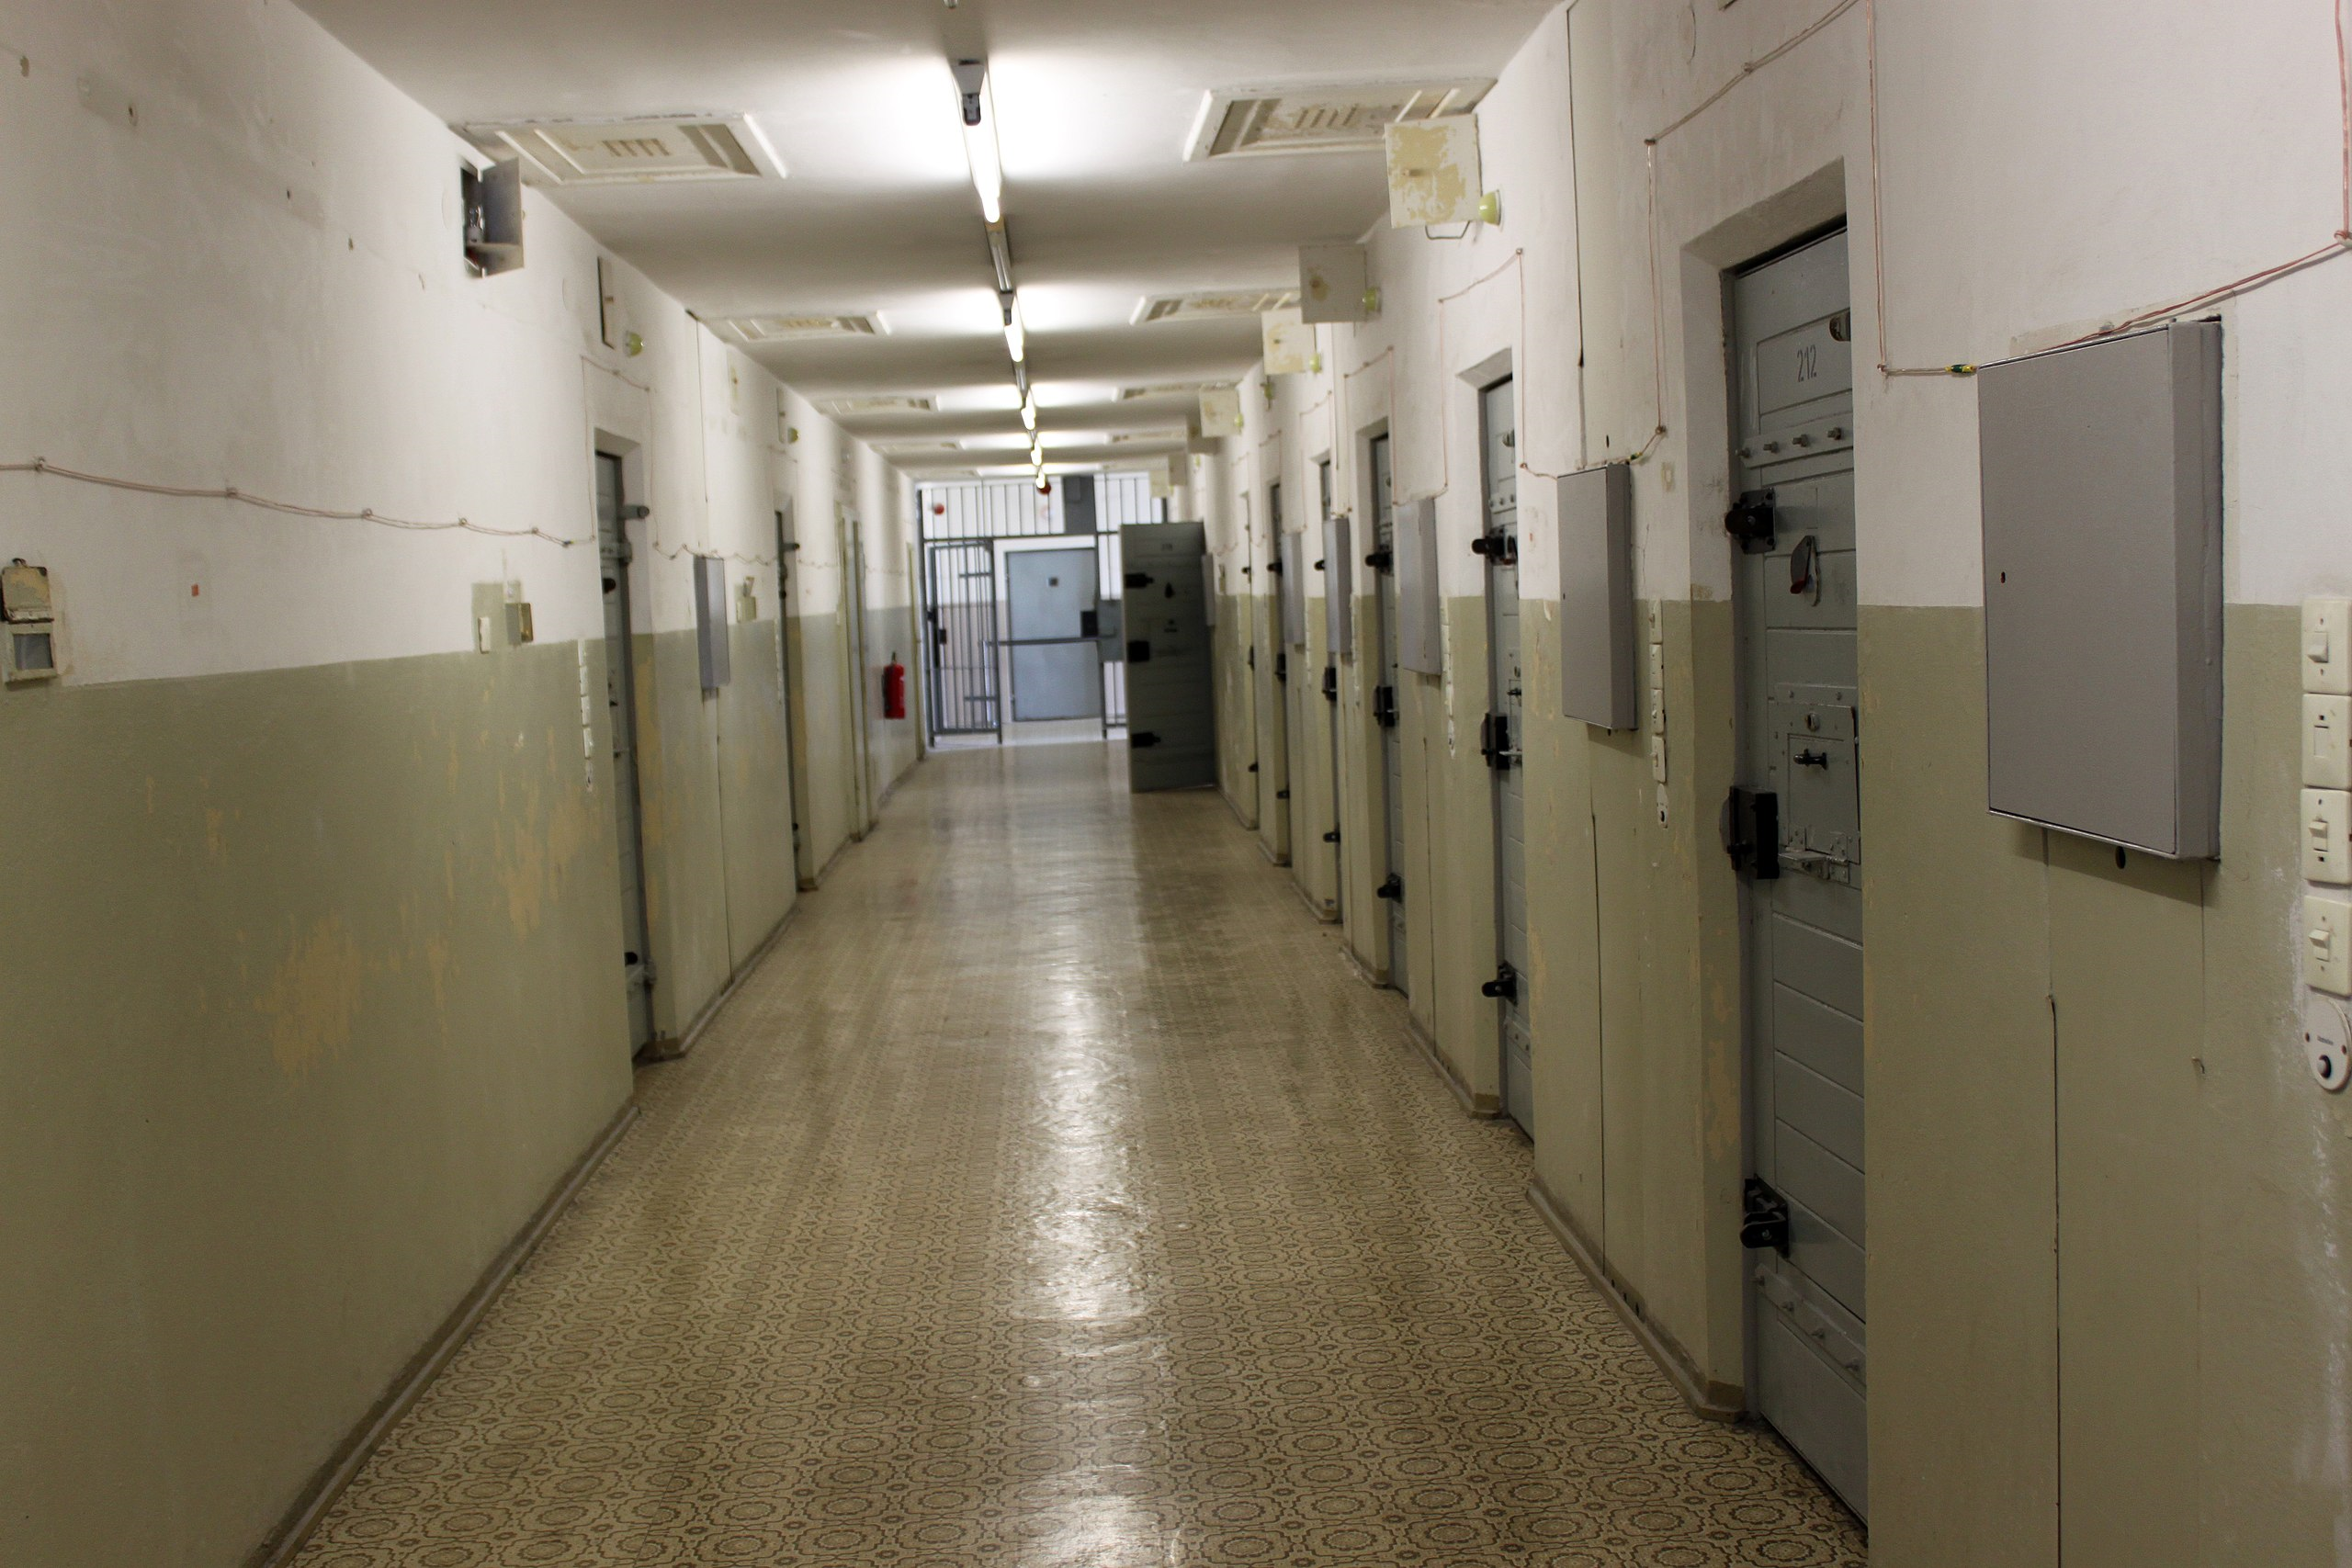 A picture of the interior of an Oklahoma jail.